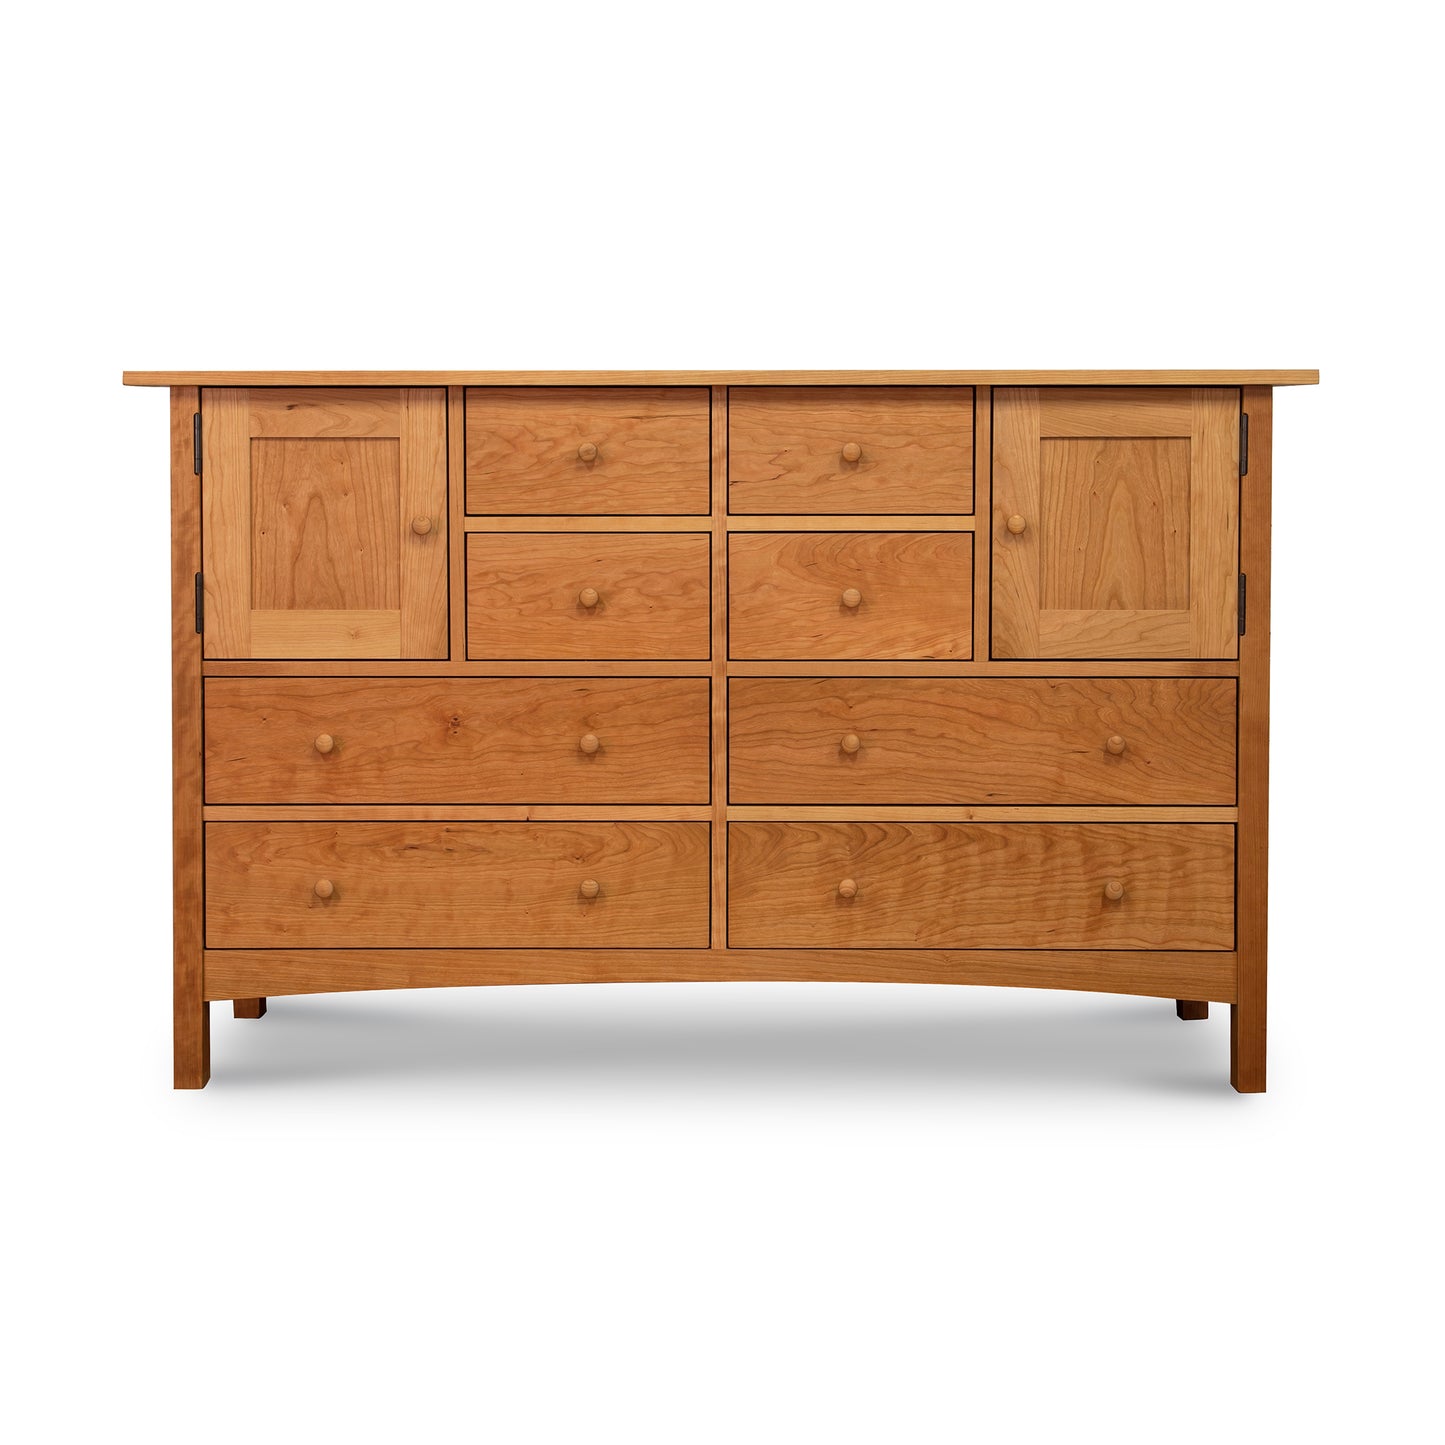 A Burlington Shaker 8-Drawer 2-Door Dresser by Vermont Furniture Designs with multiple drawers and round knobs, isolated on a white background.